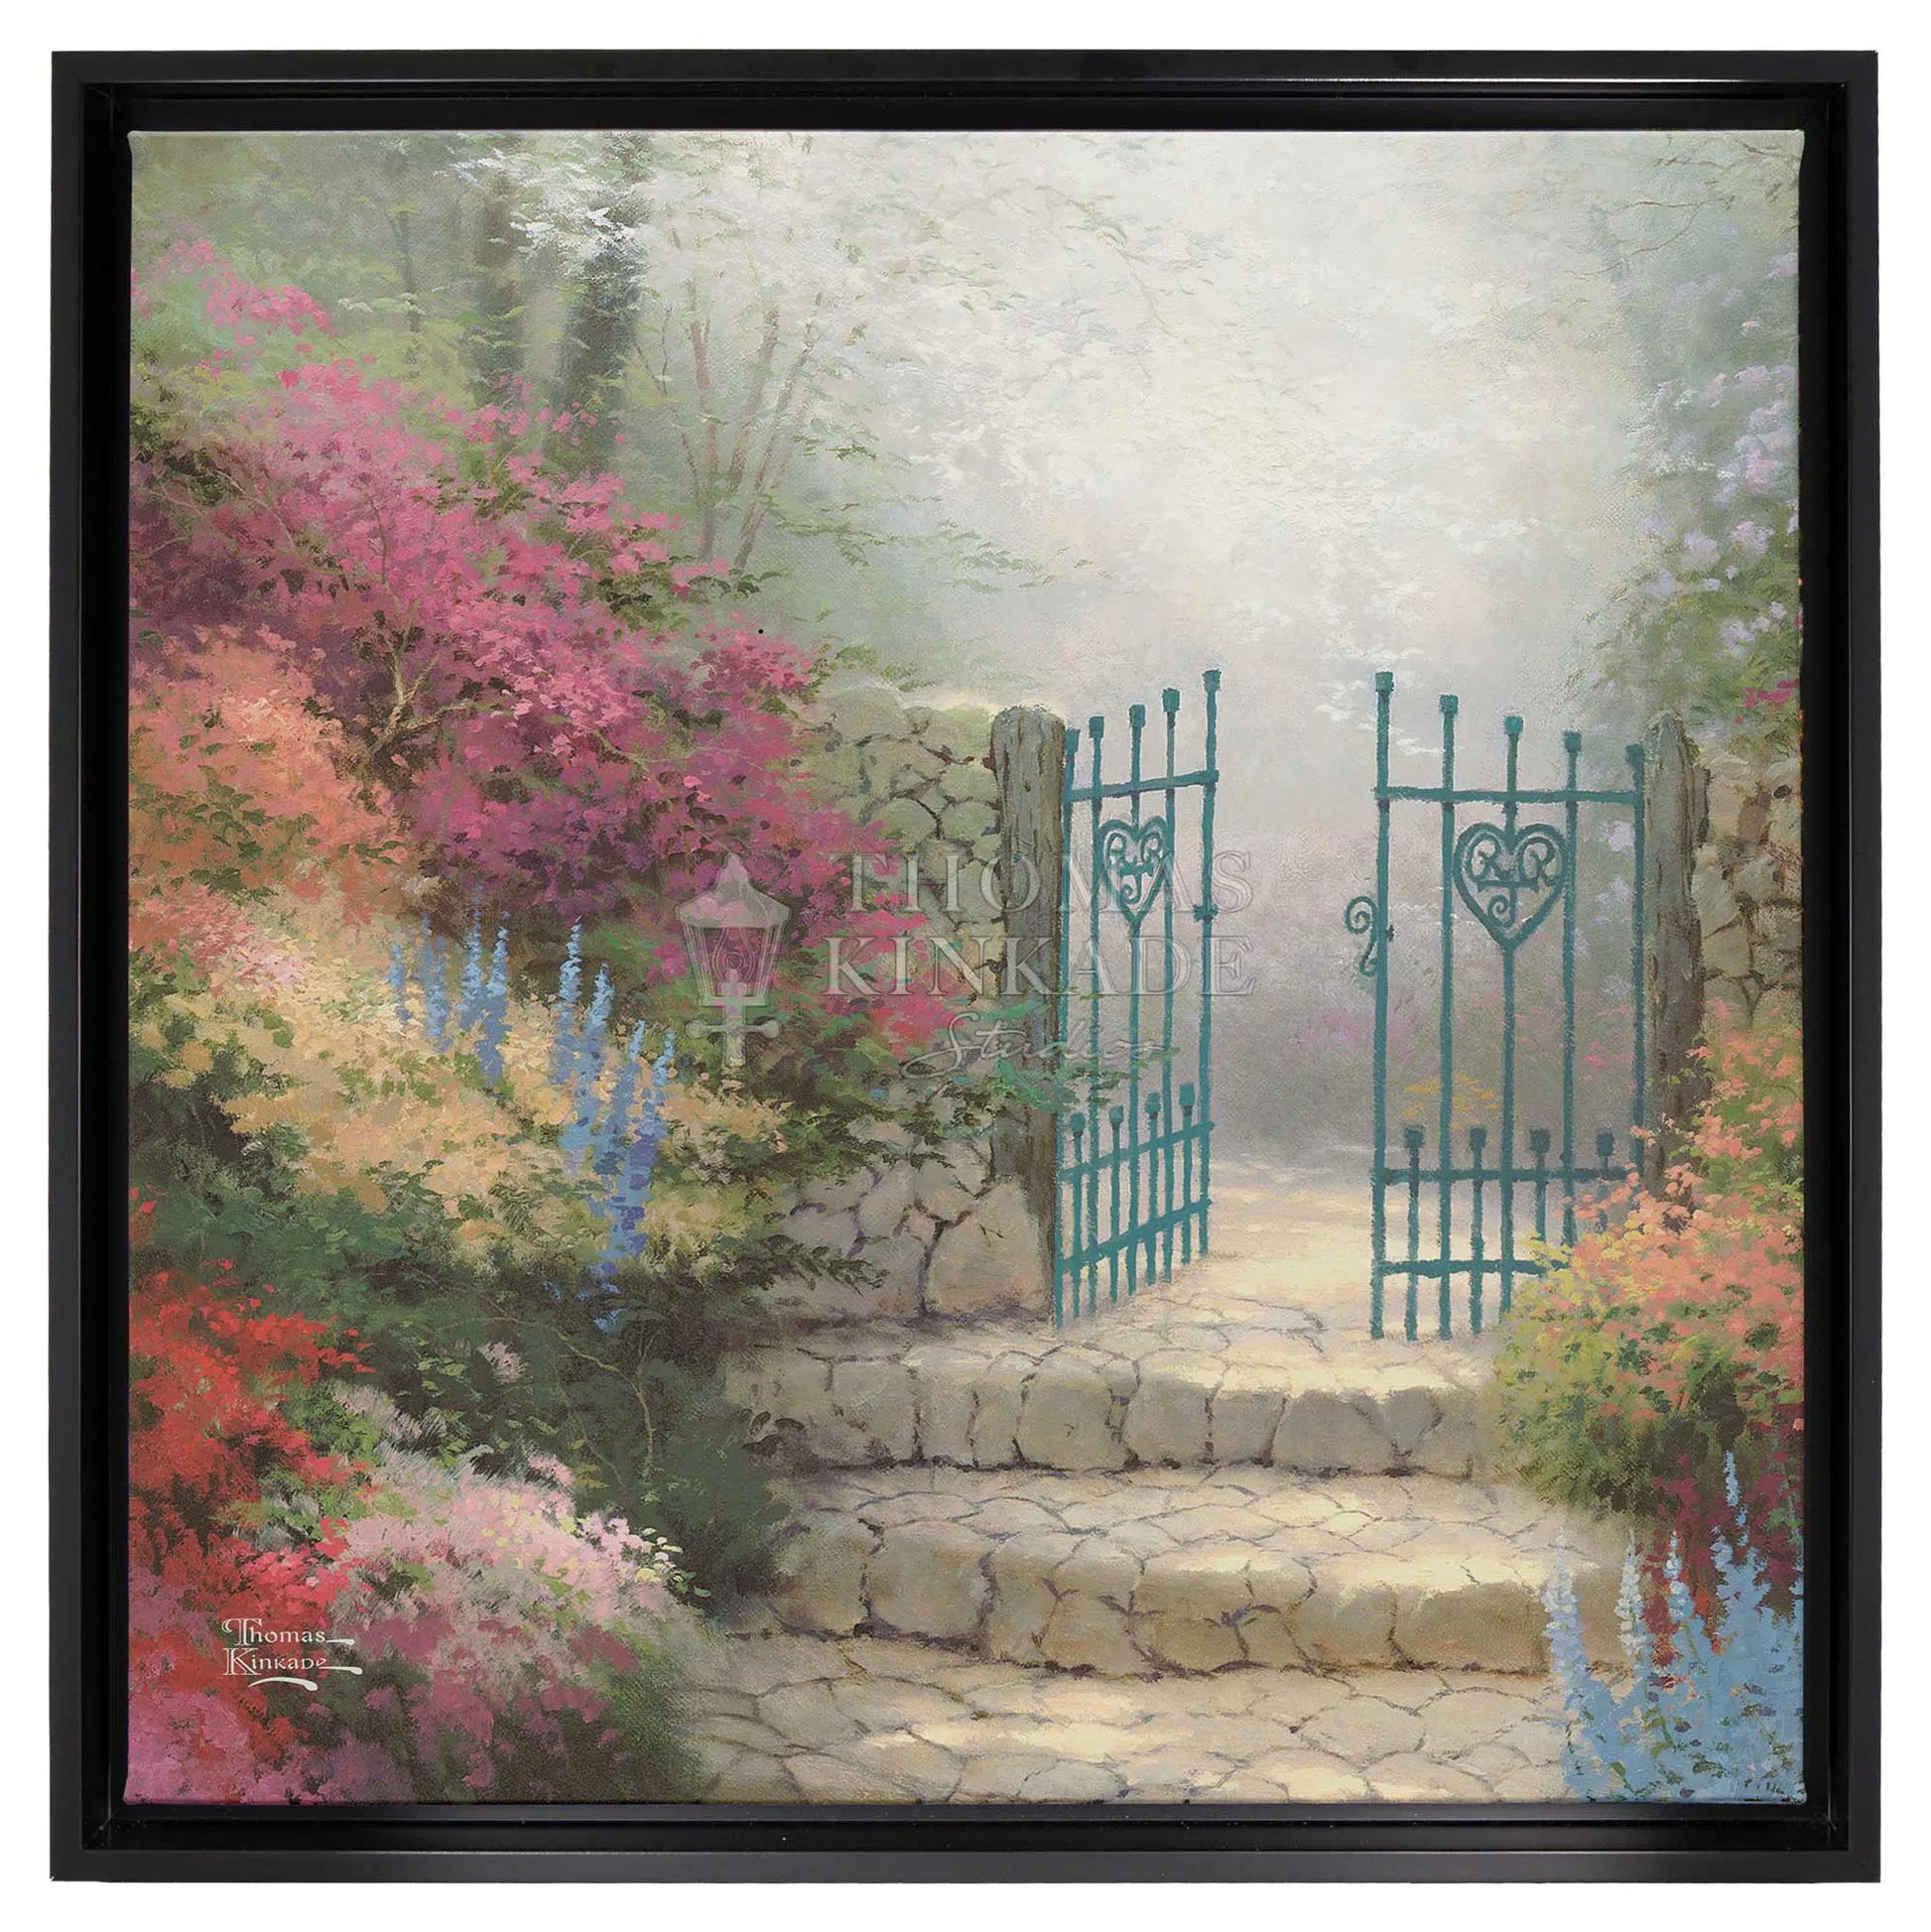 The Garden of Promise - 20 x 20 Gallery Wrapped Canvas (Onyx